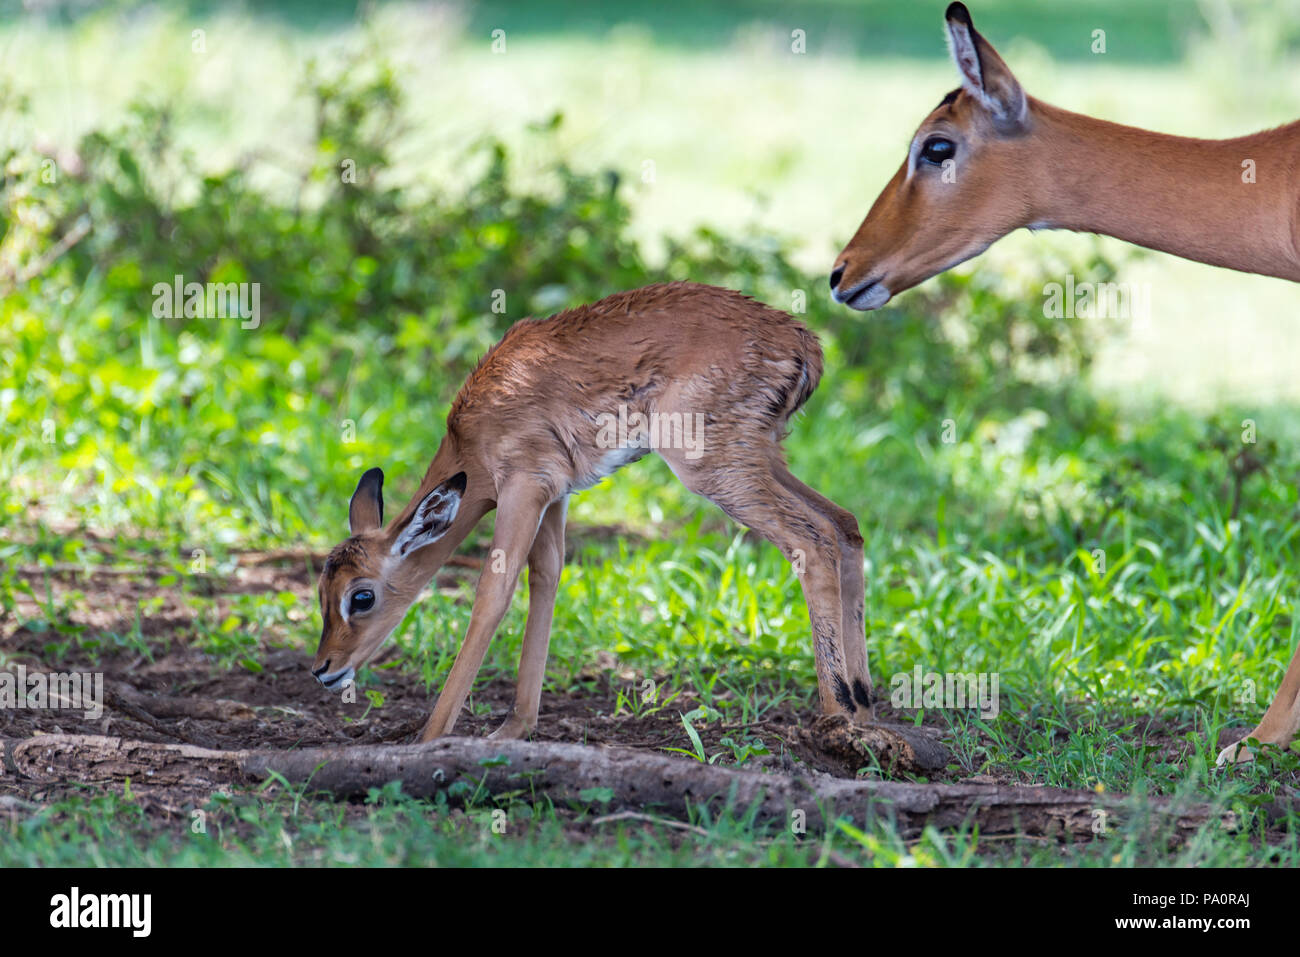 Baby Antelopes First Steps with Mother Stock Photo